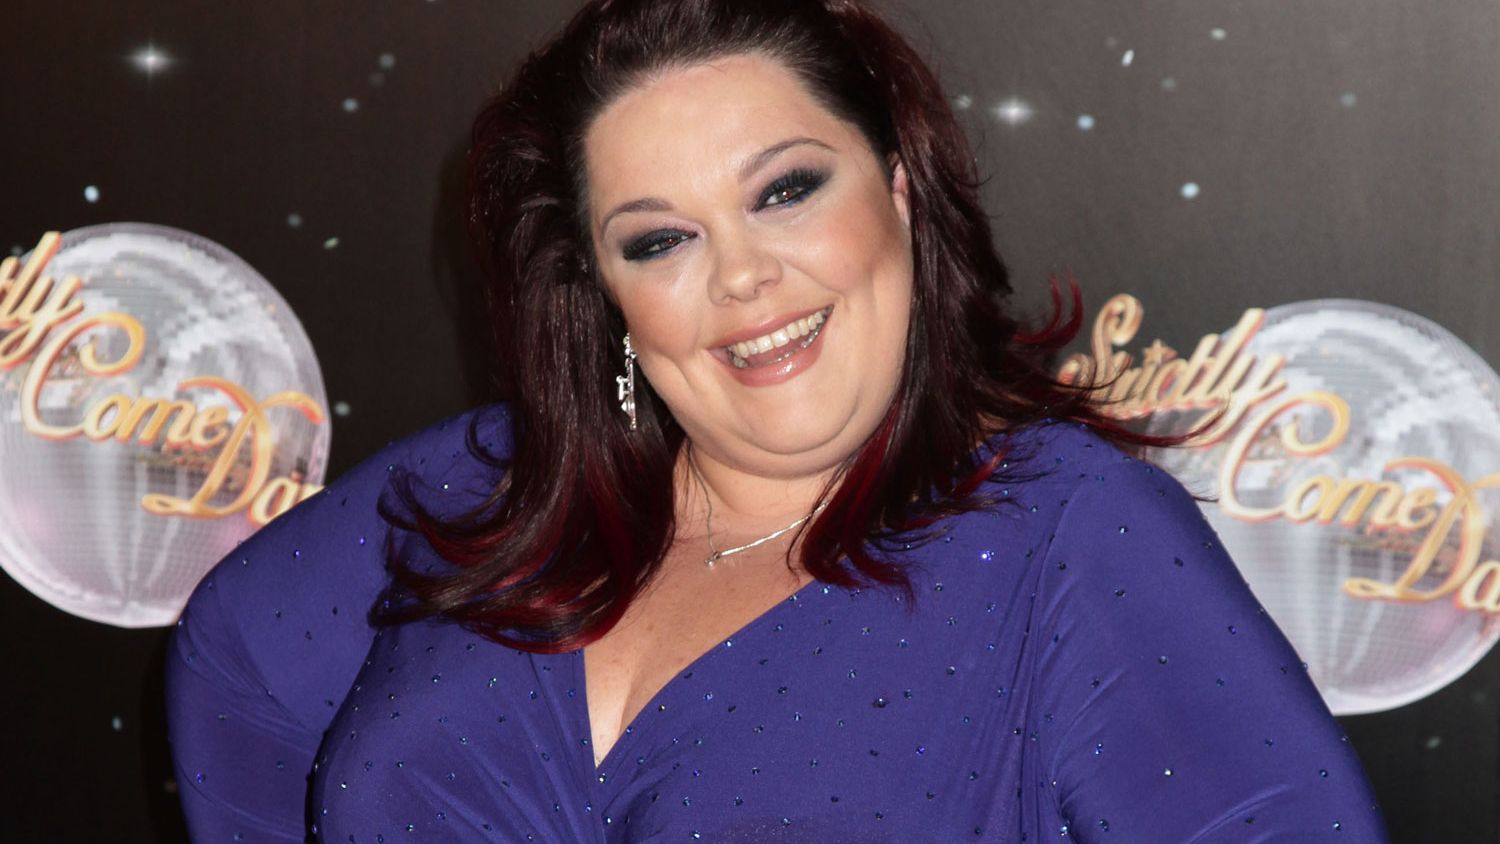 Ex-Emmerdale actress Lisa Riley reveals 6 stone weight loss | Celebrity ...